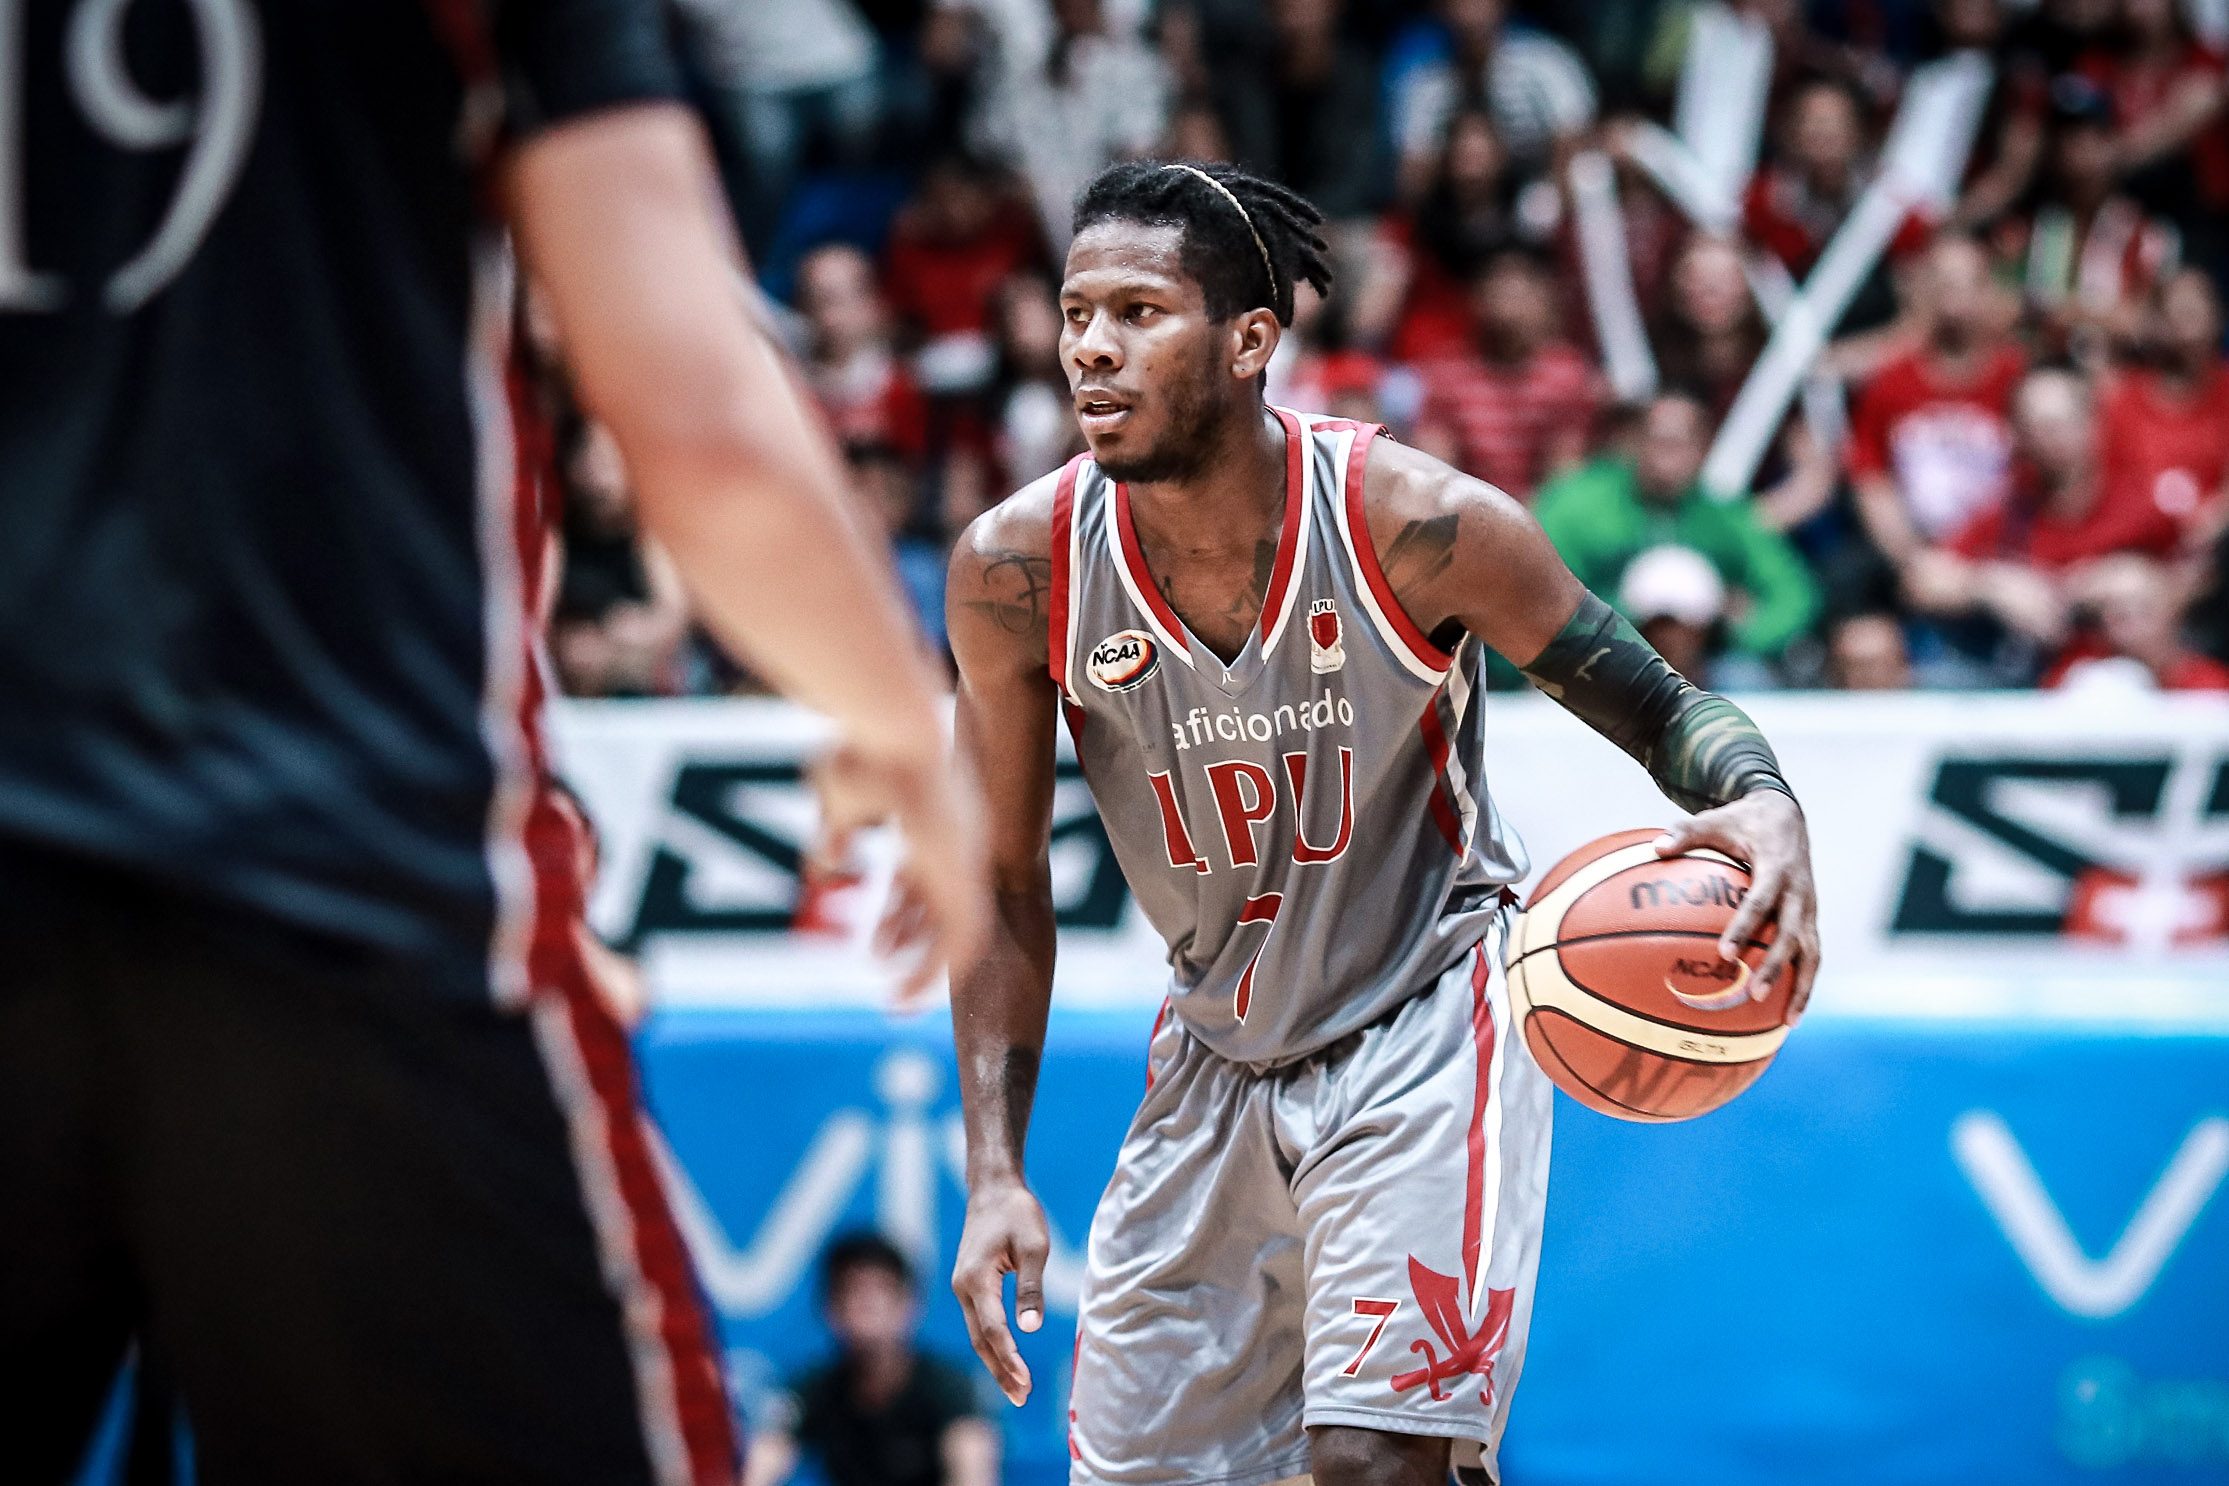 CJ Perez disqualified from MVP, Mythical 5 race